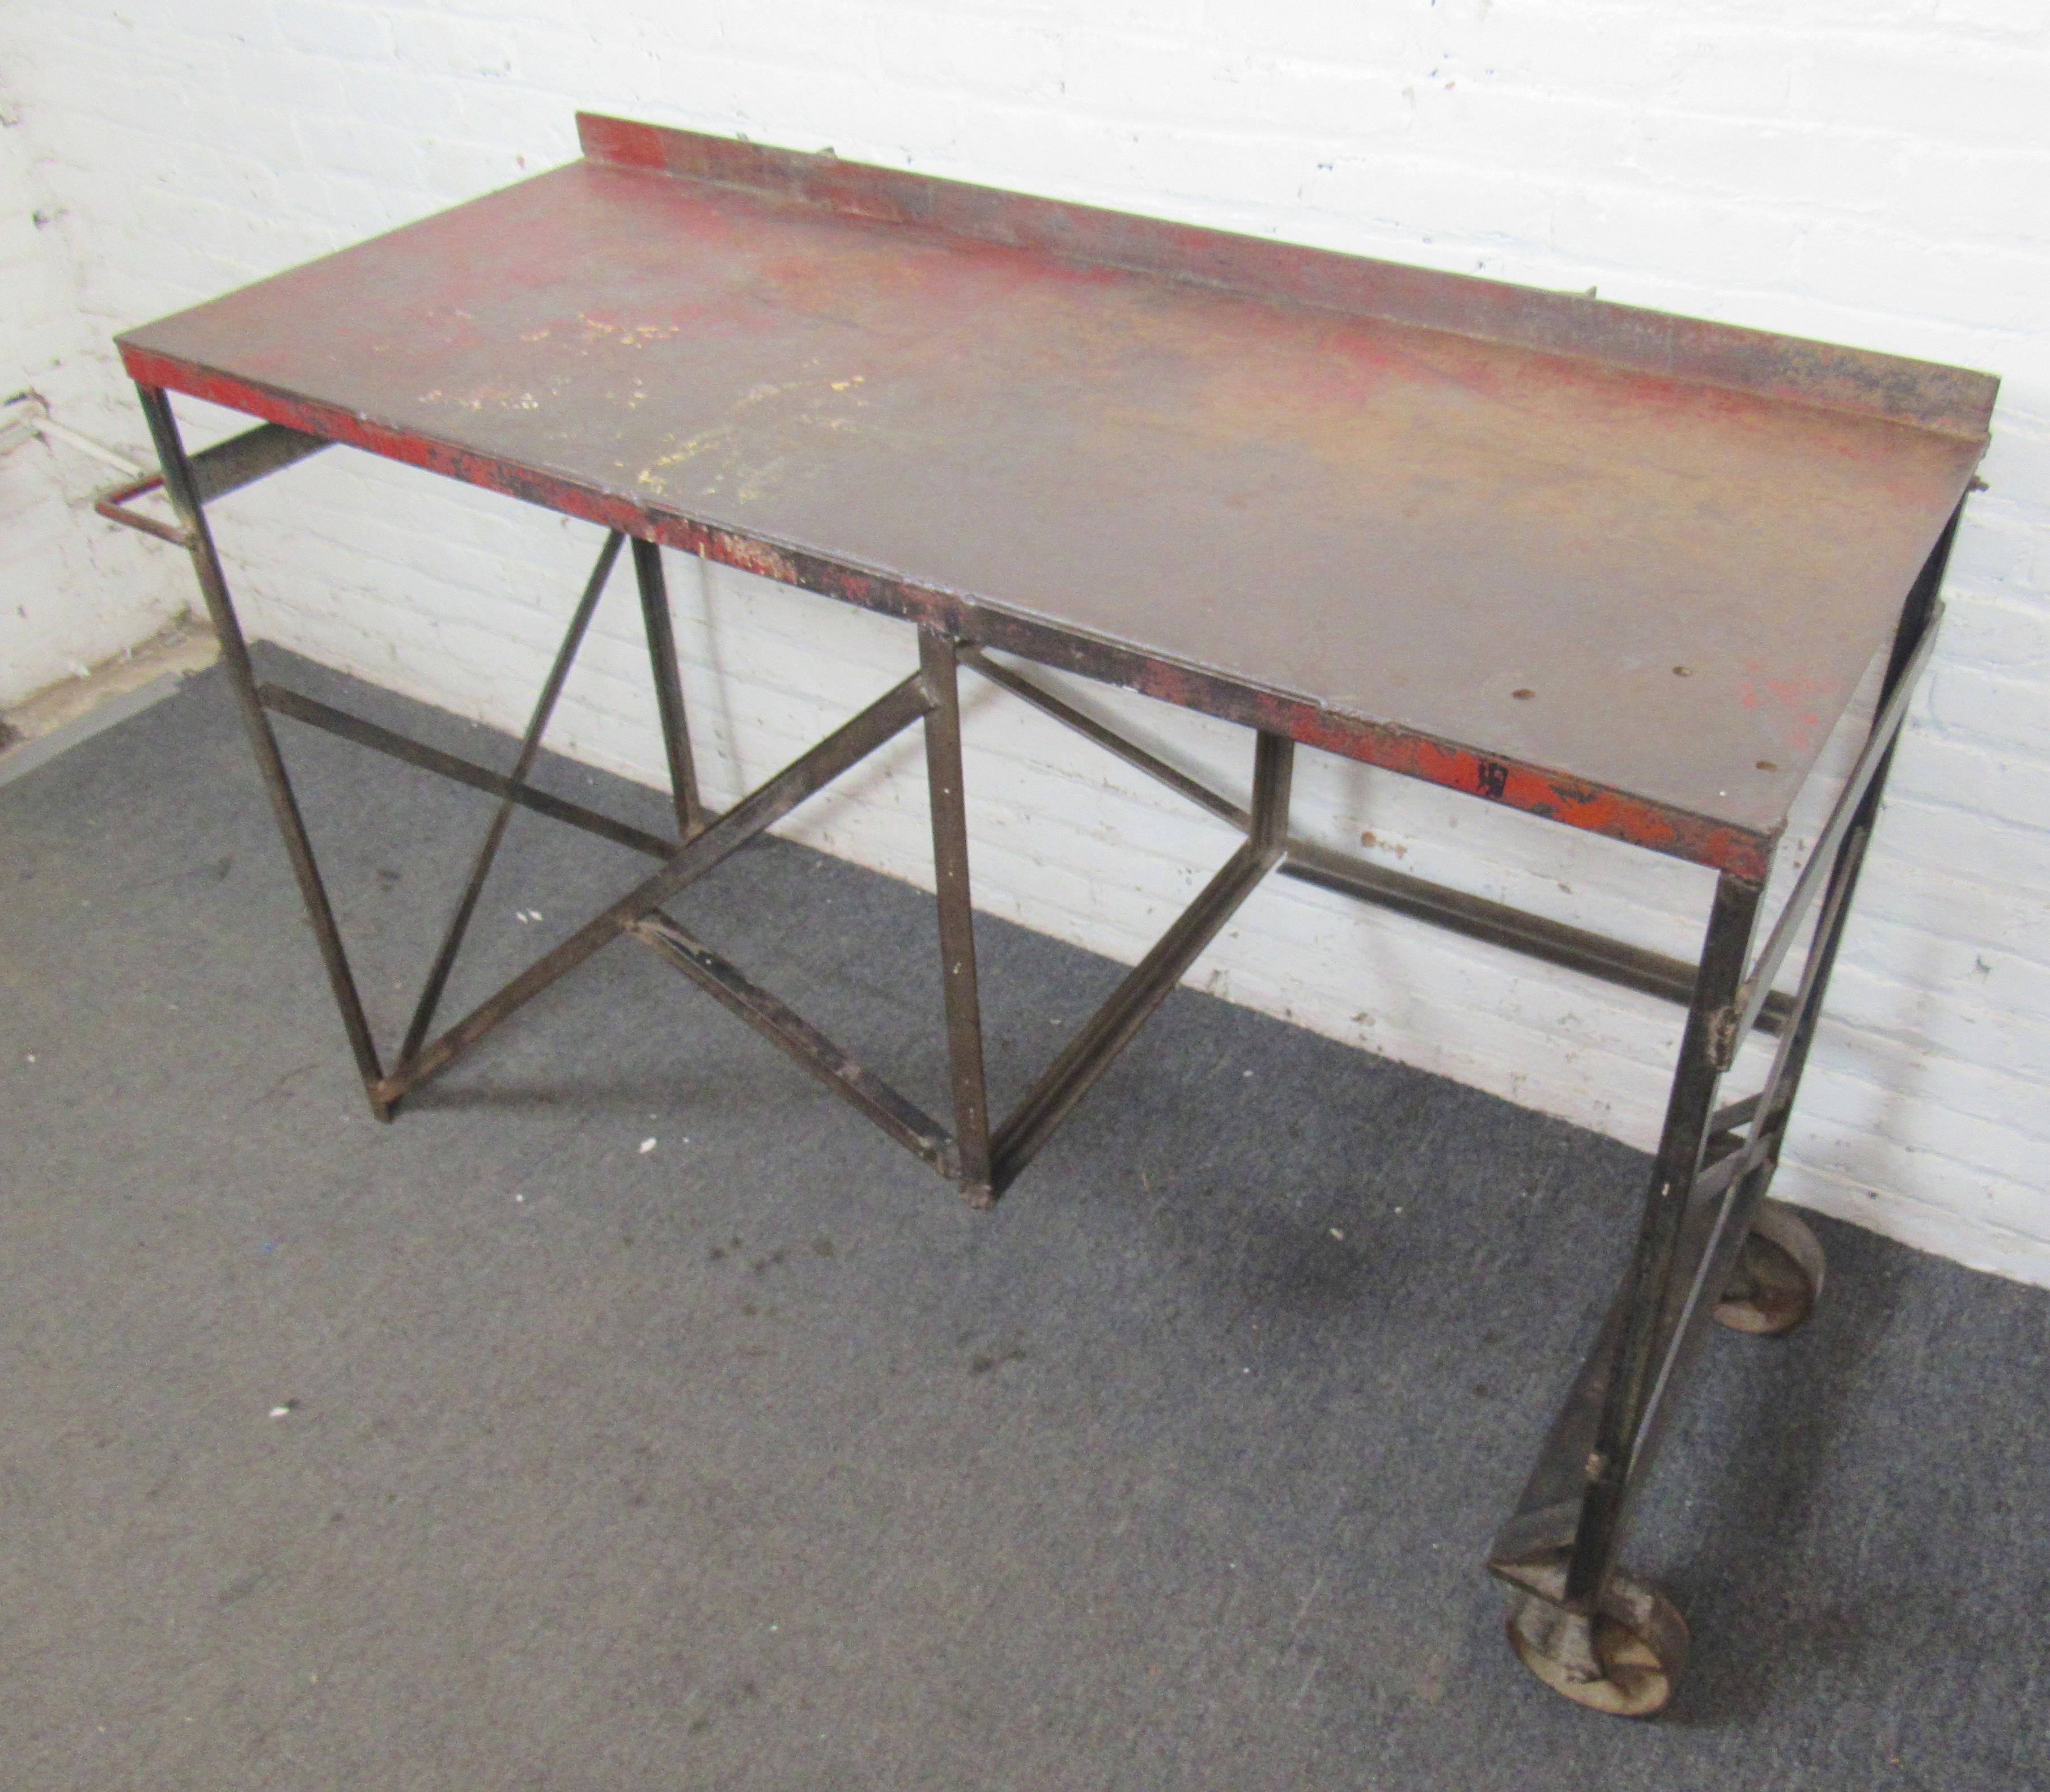 Large iron work table with caster wheels for easy mobility. Great for kitchen use.
Location: Brooklyn NY.